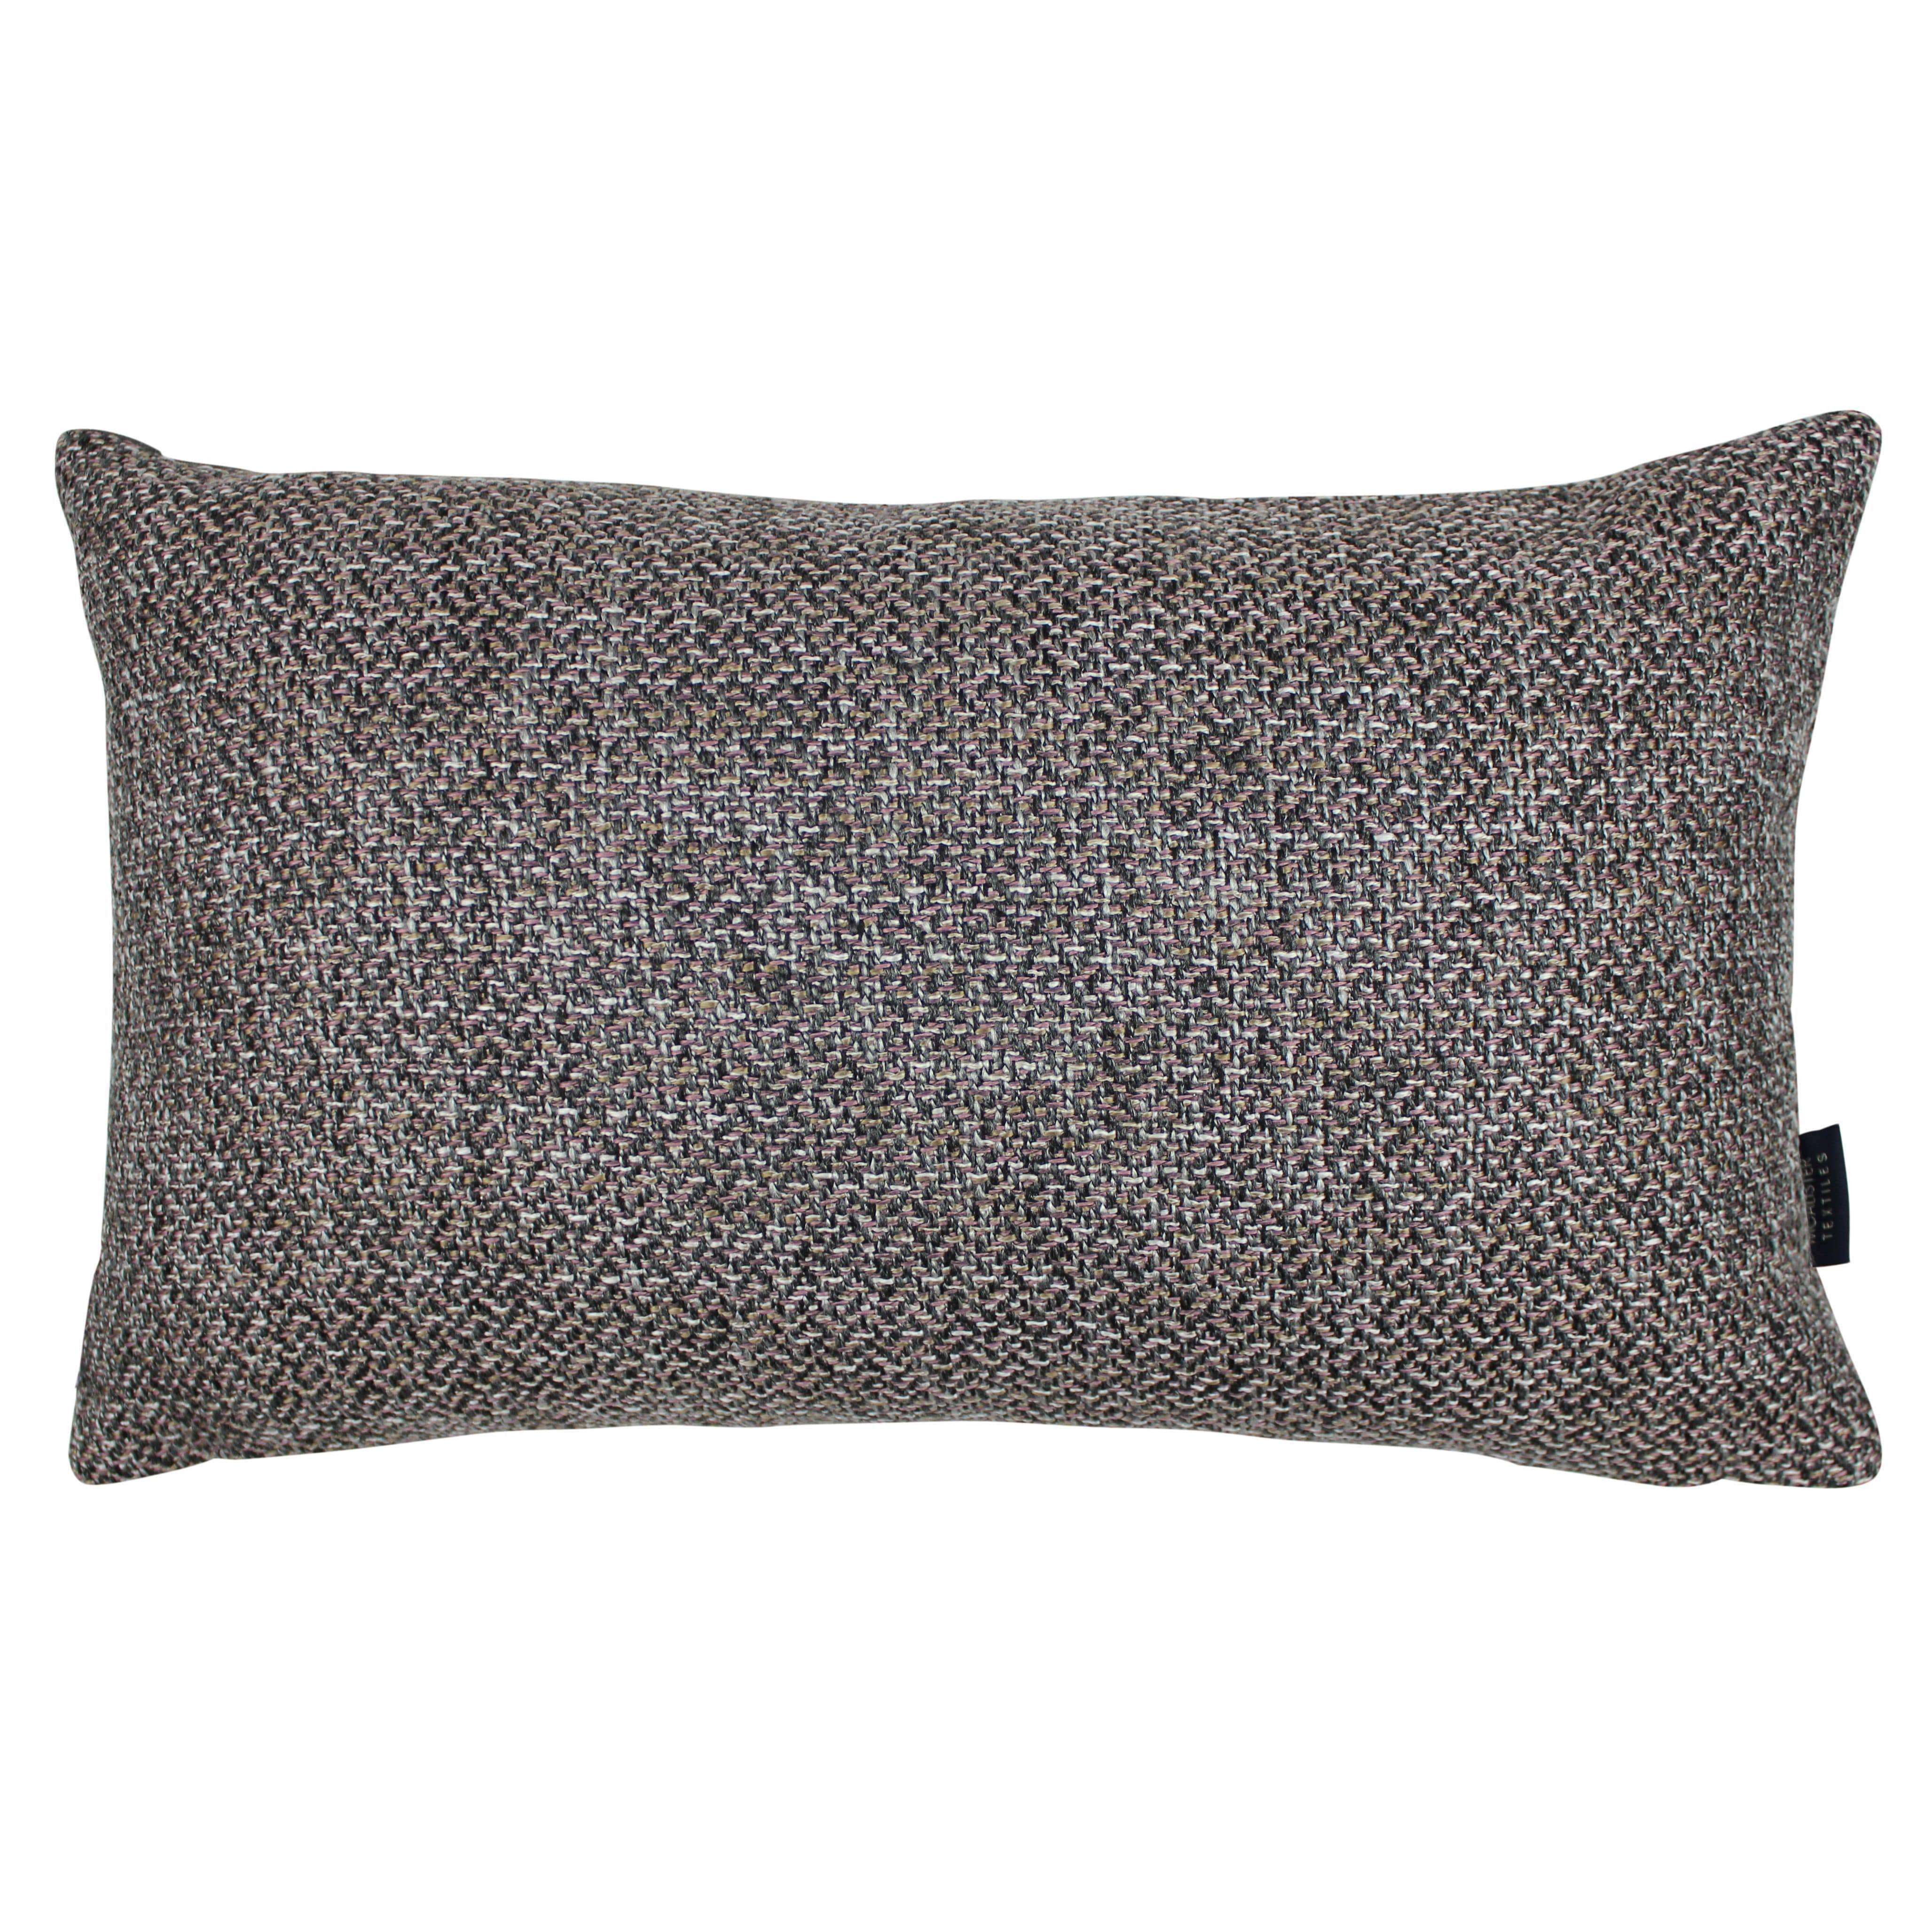 Lewis Tweed Cushion Grey Heather and Charcoal, Polyester Filler / 50cm x 30cm